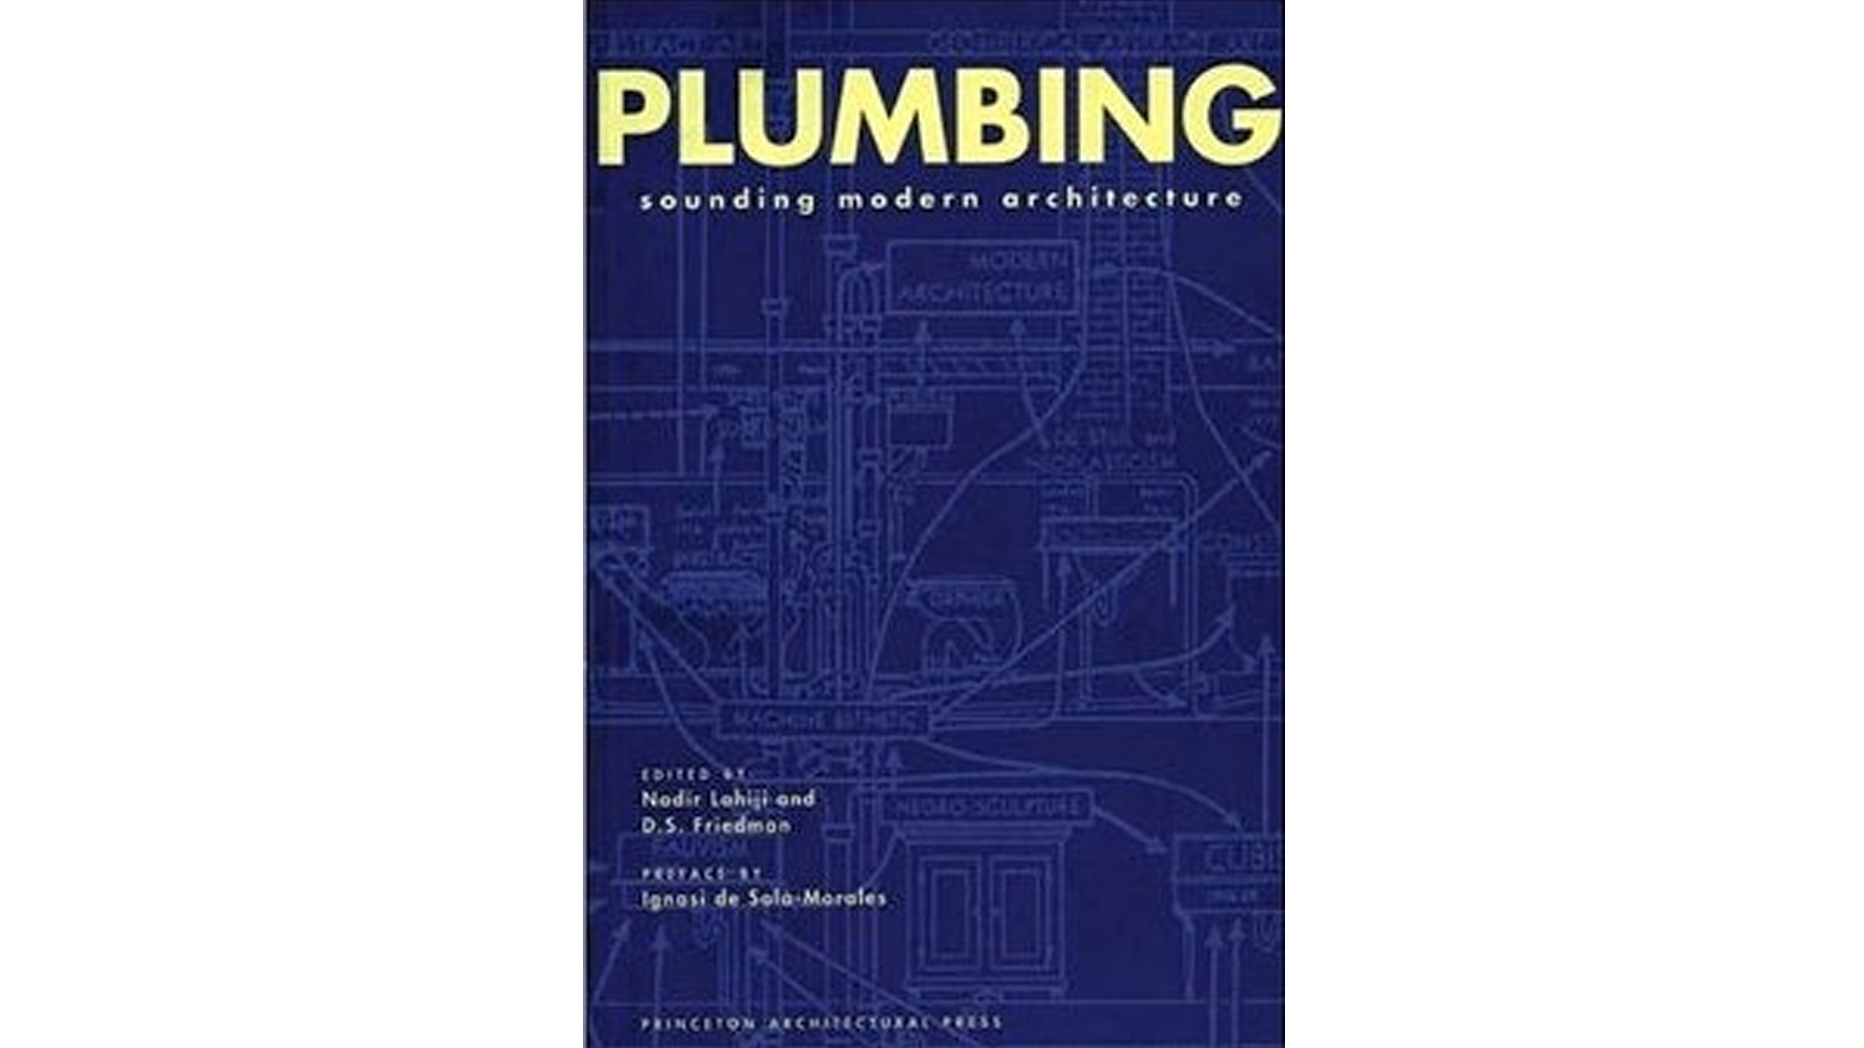 Plumbing - Sounding Modern Architecture book cover